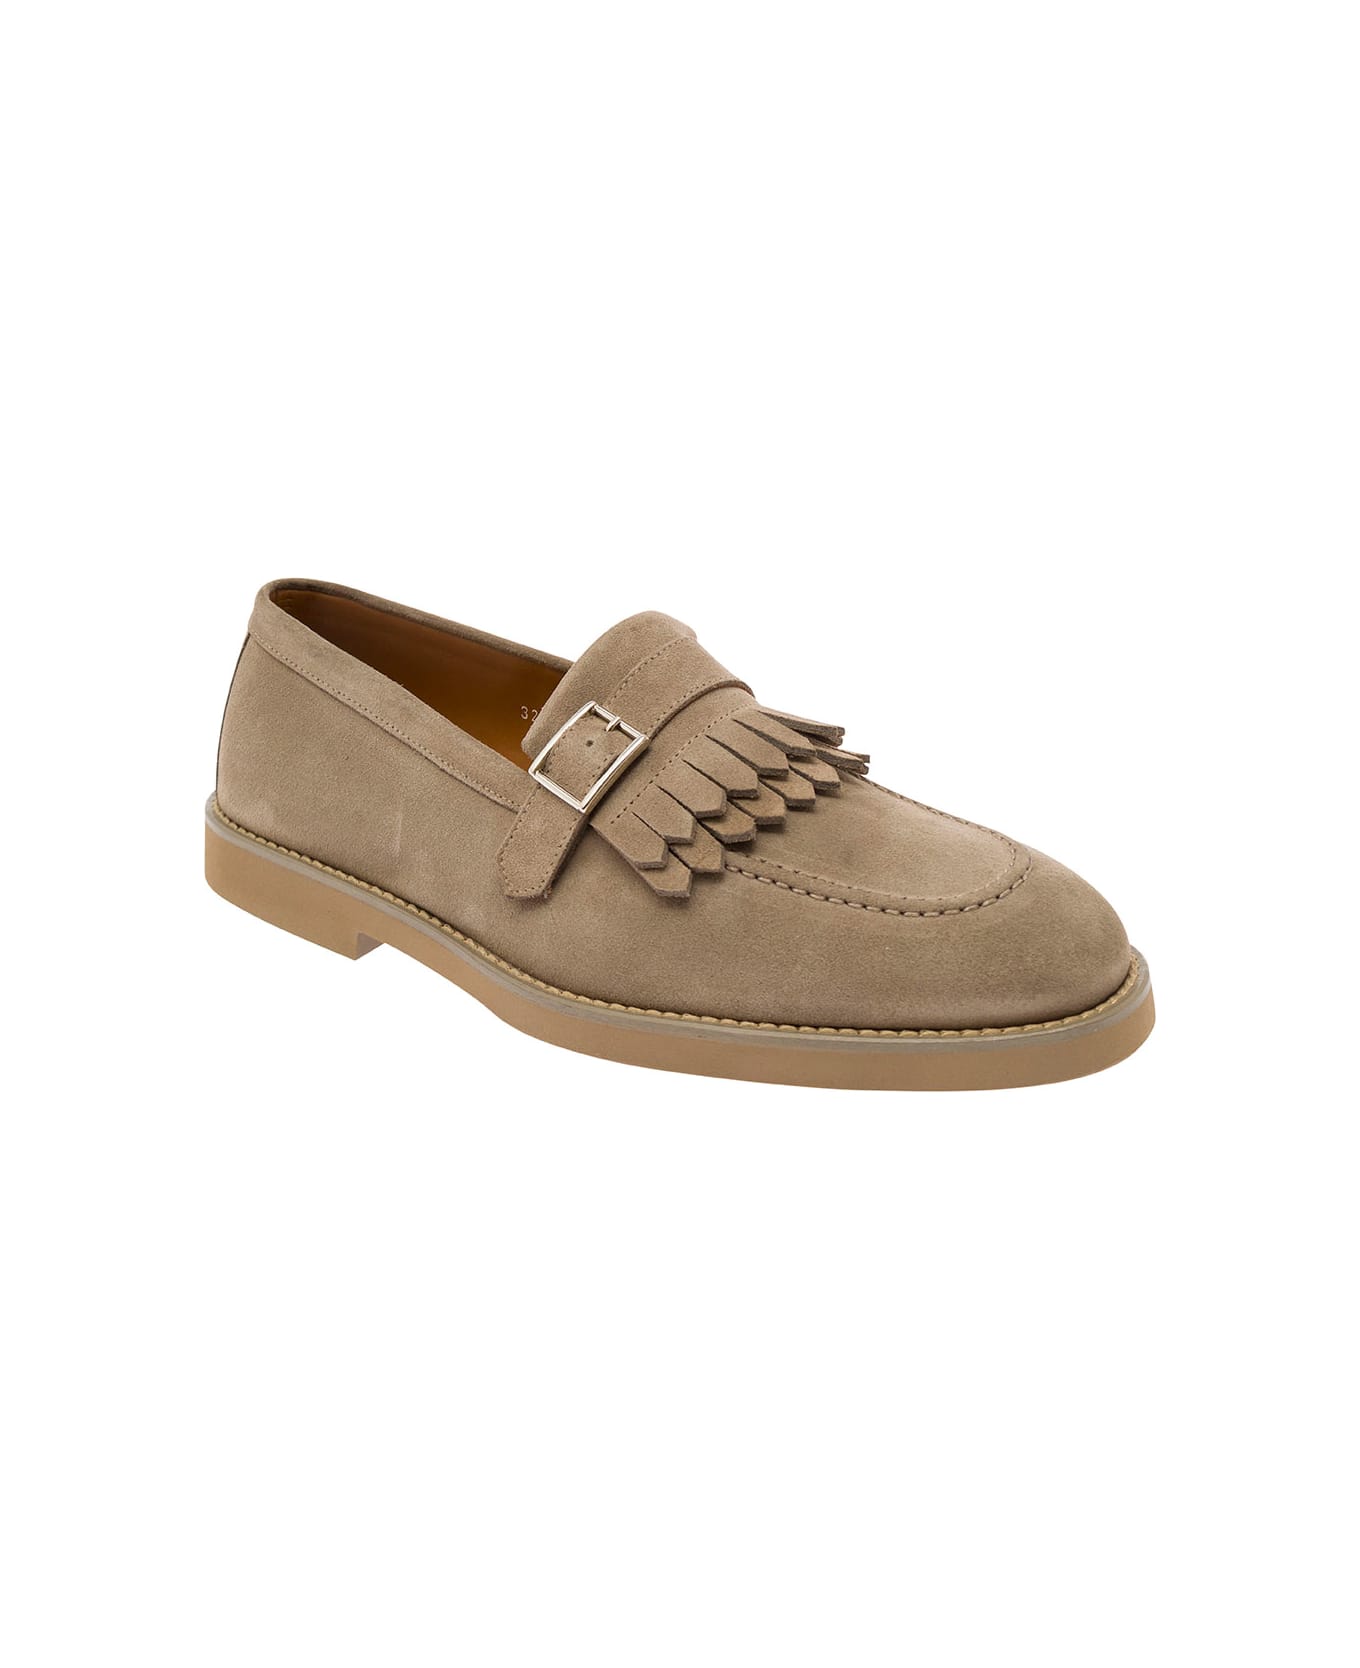 Doucal's Beige Loafers With Fringe And Buckle In Suede Man - Beige ローファー＆デッキシューズ